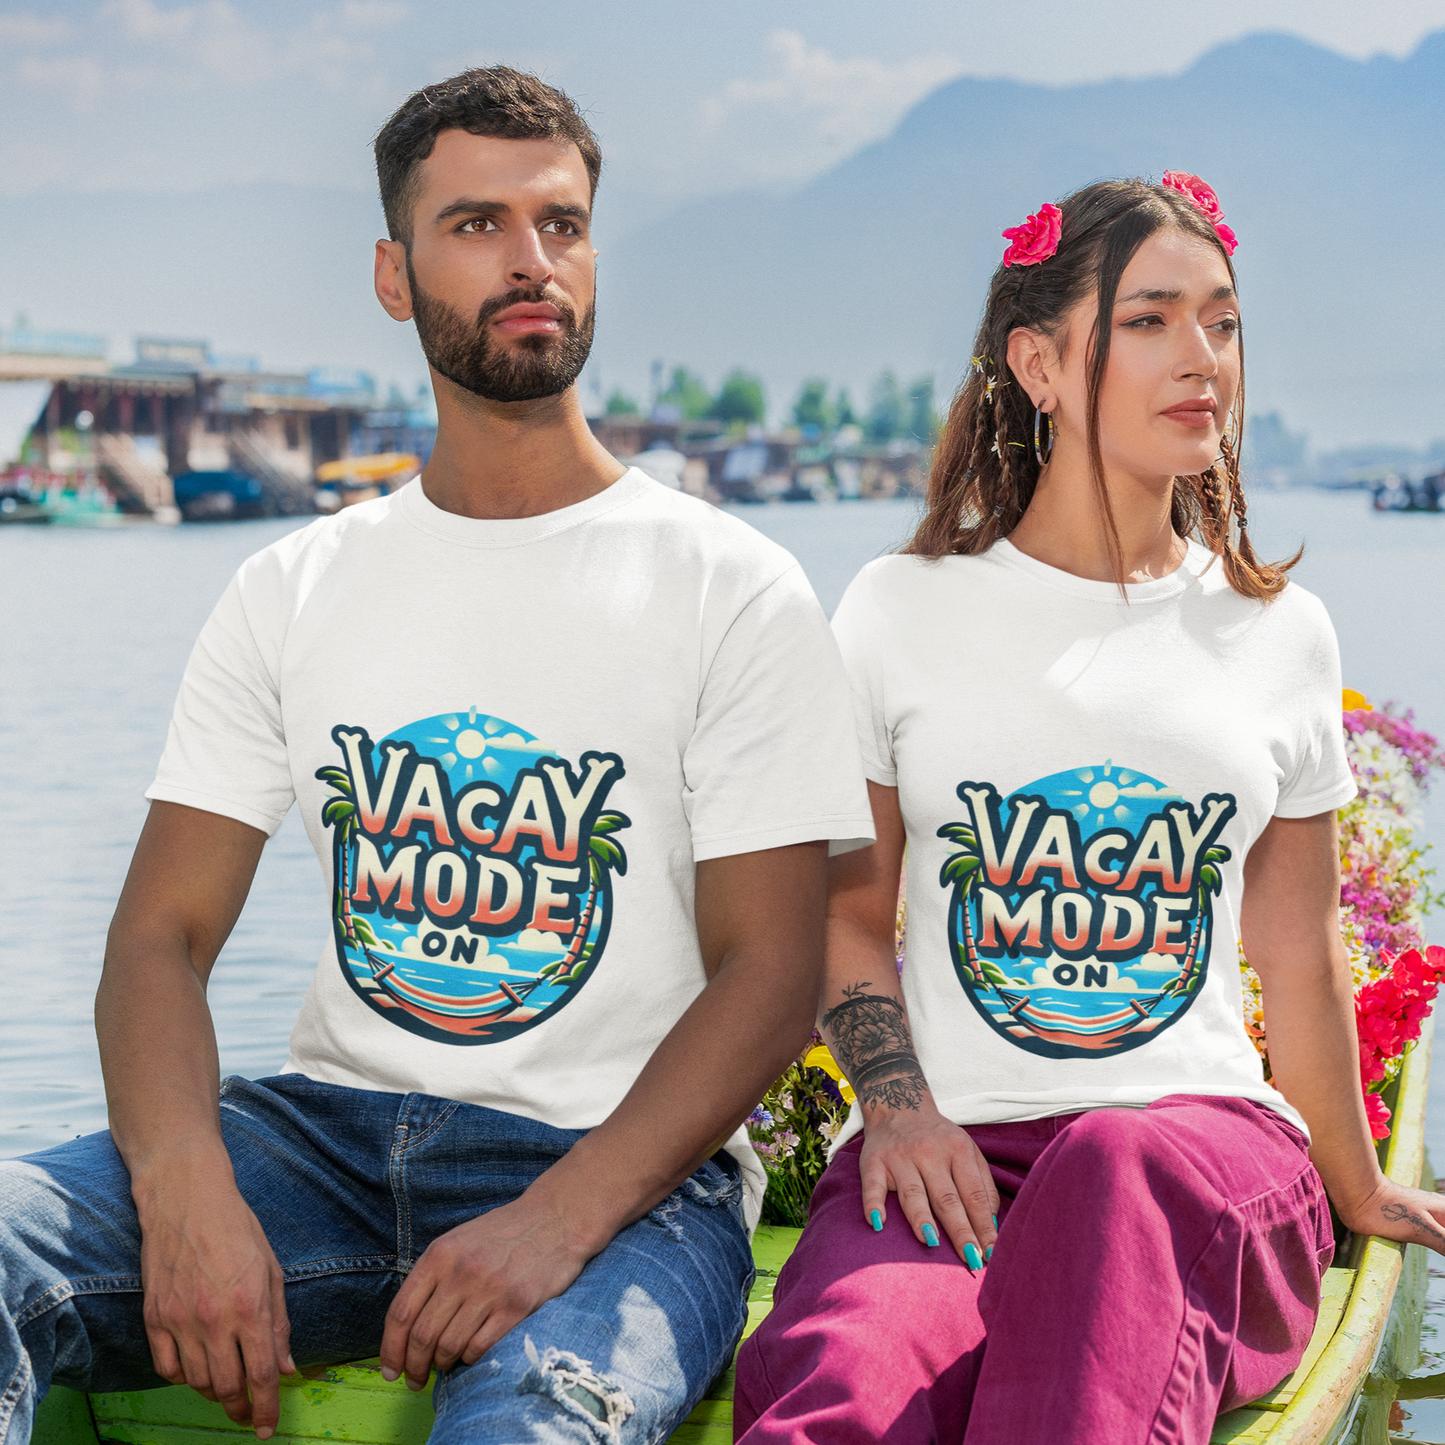 VACAY MODE ON Couples T-Shirts